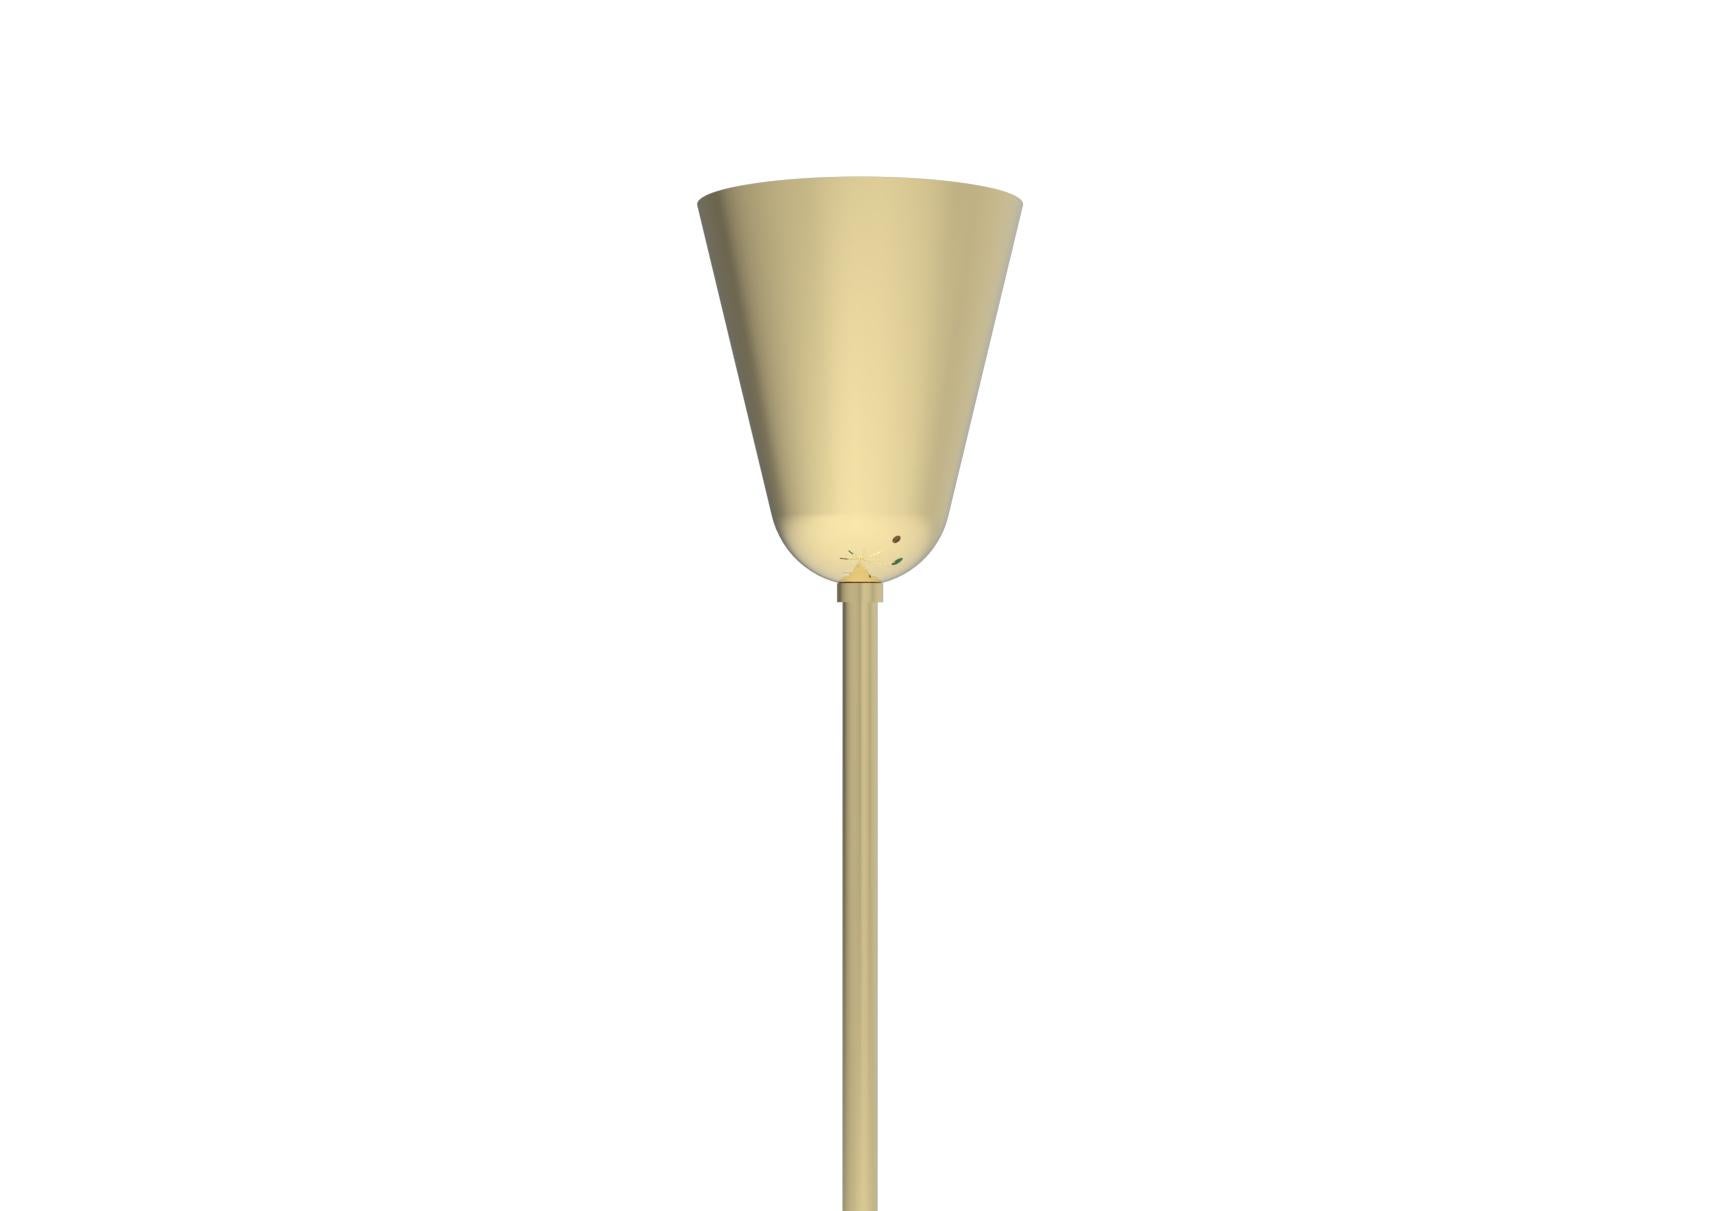 Mid-Century Modern 21st Century Triennale pendant lamp, brass&brown-green-white, Lelii, 2019, Italy For Sale